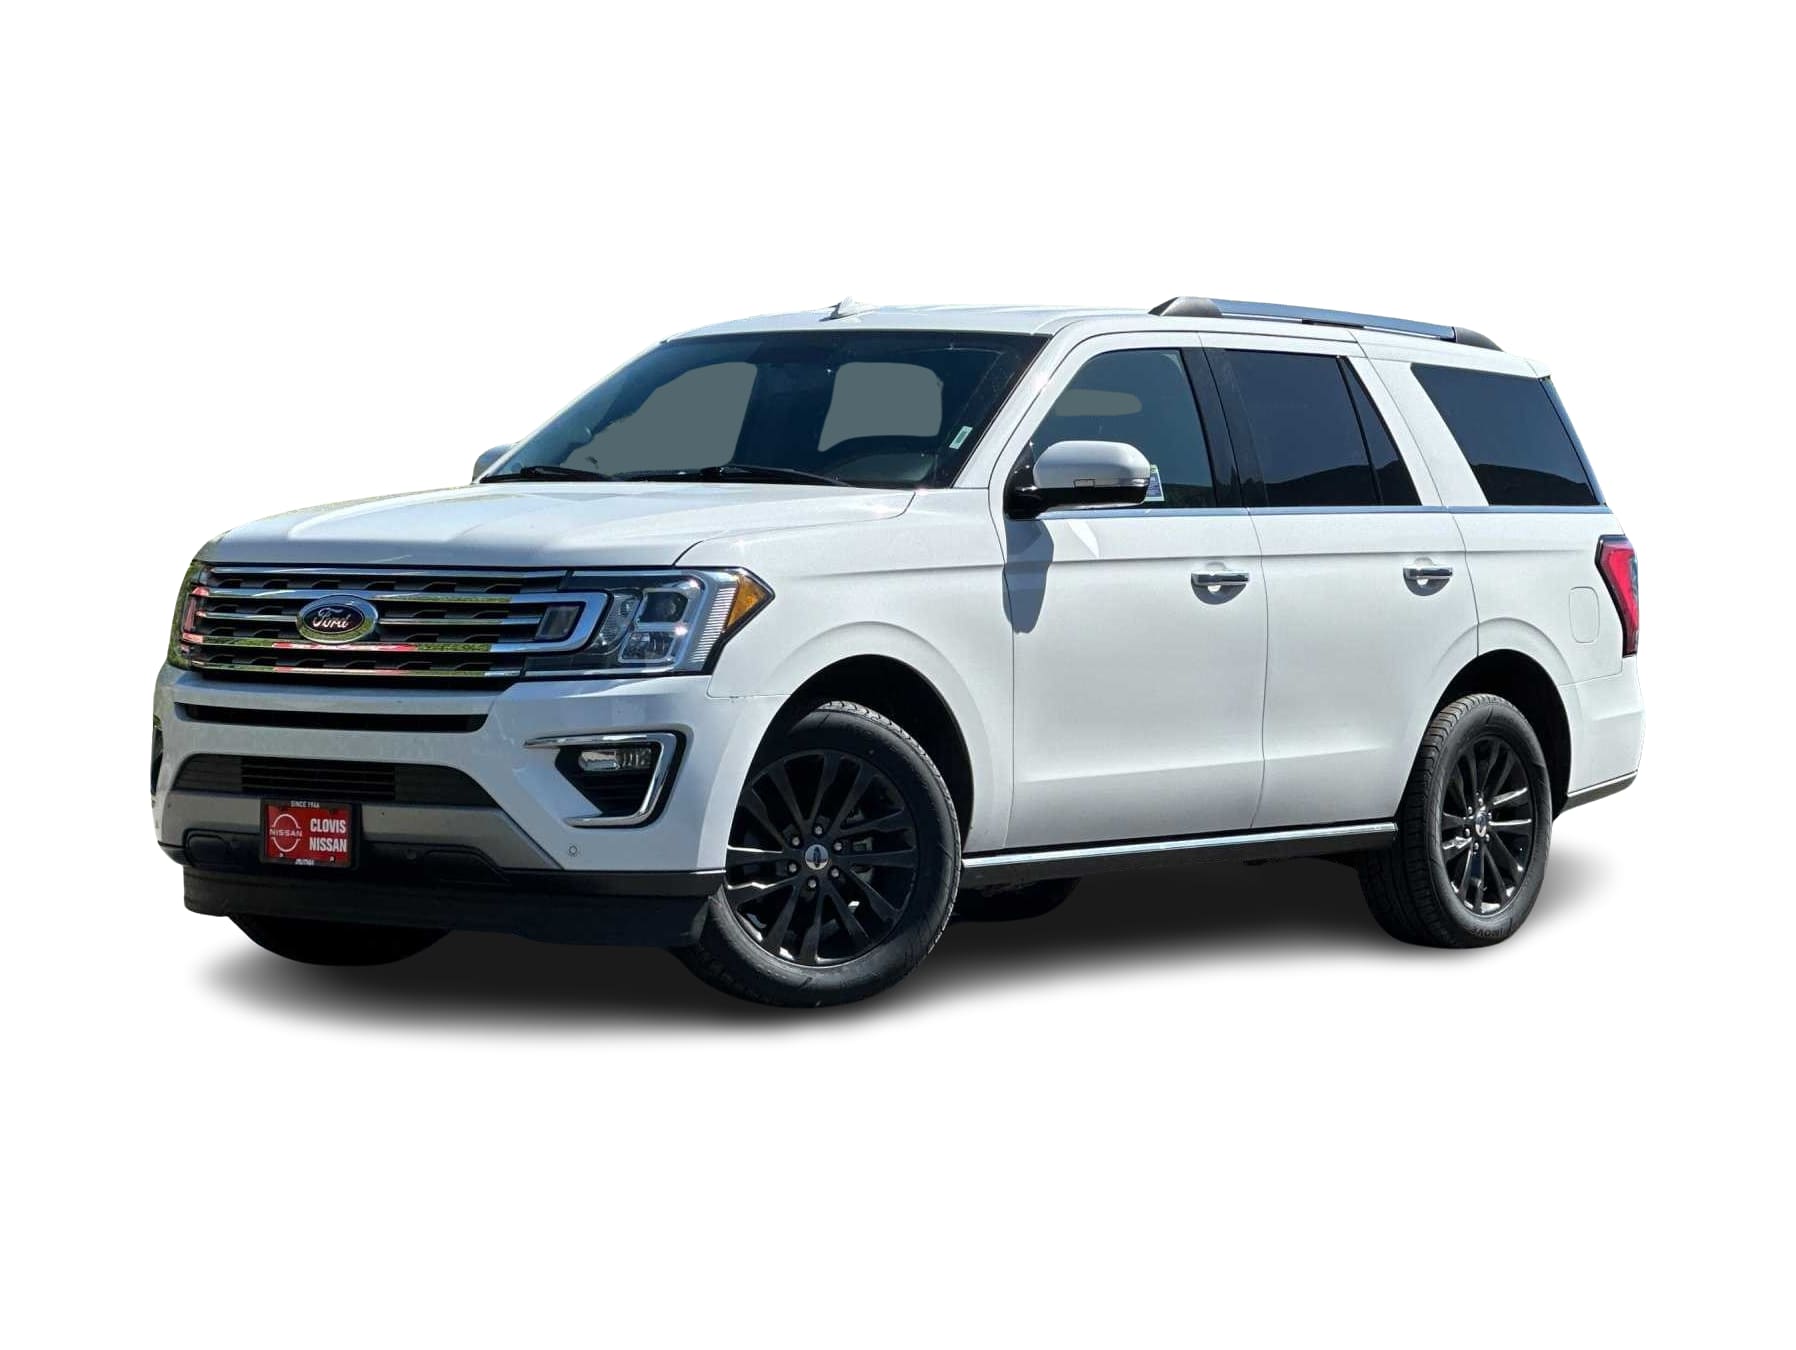 2019 Ford Expedition Limited Hero Image